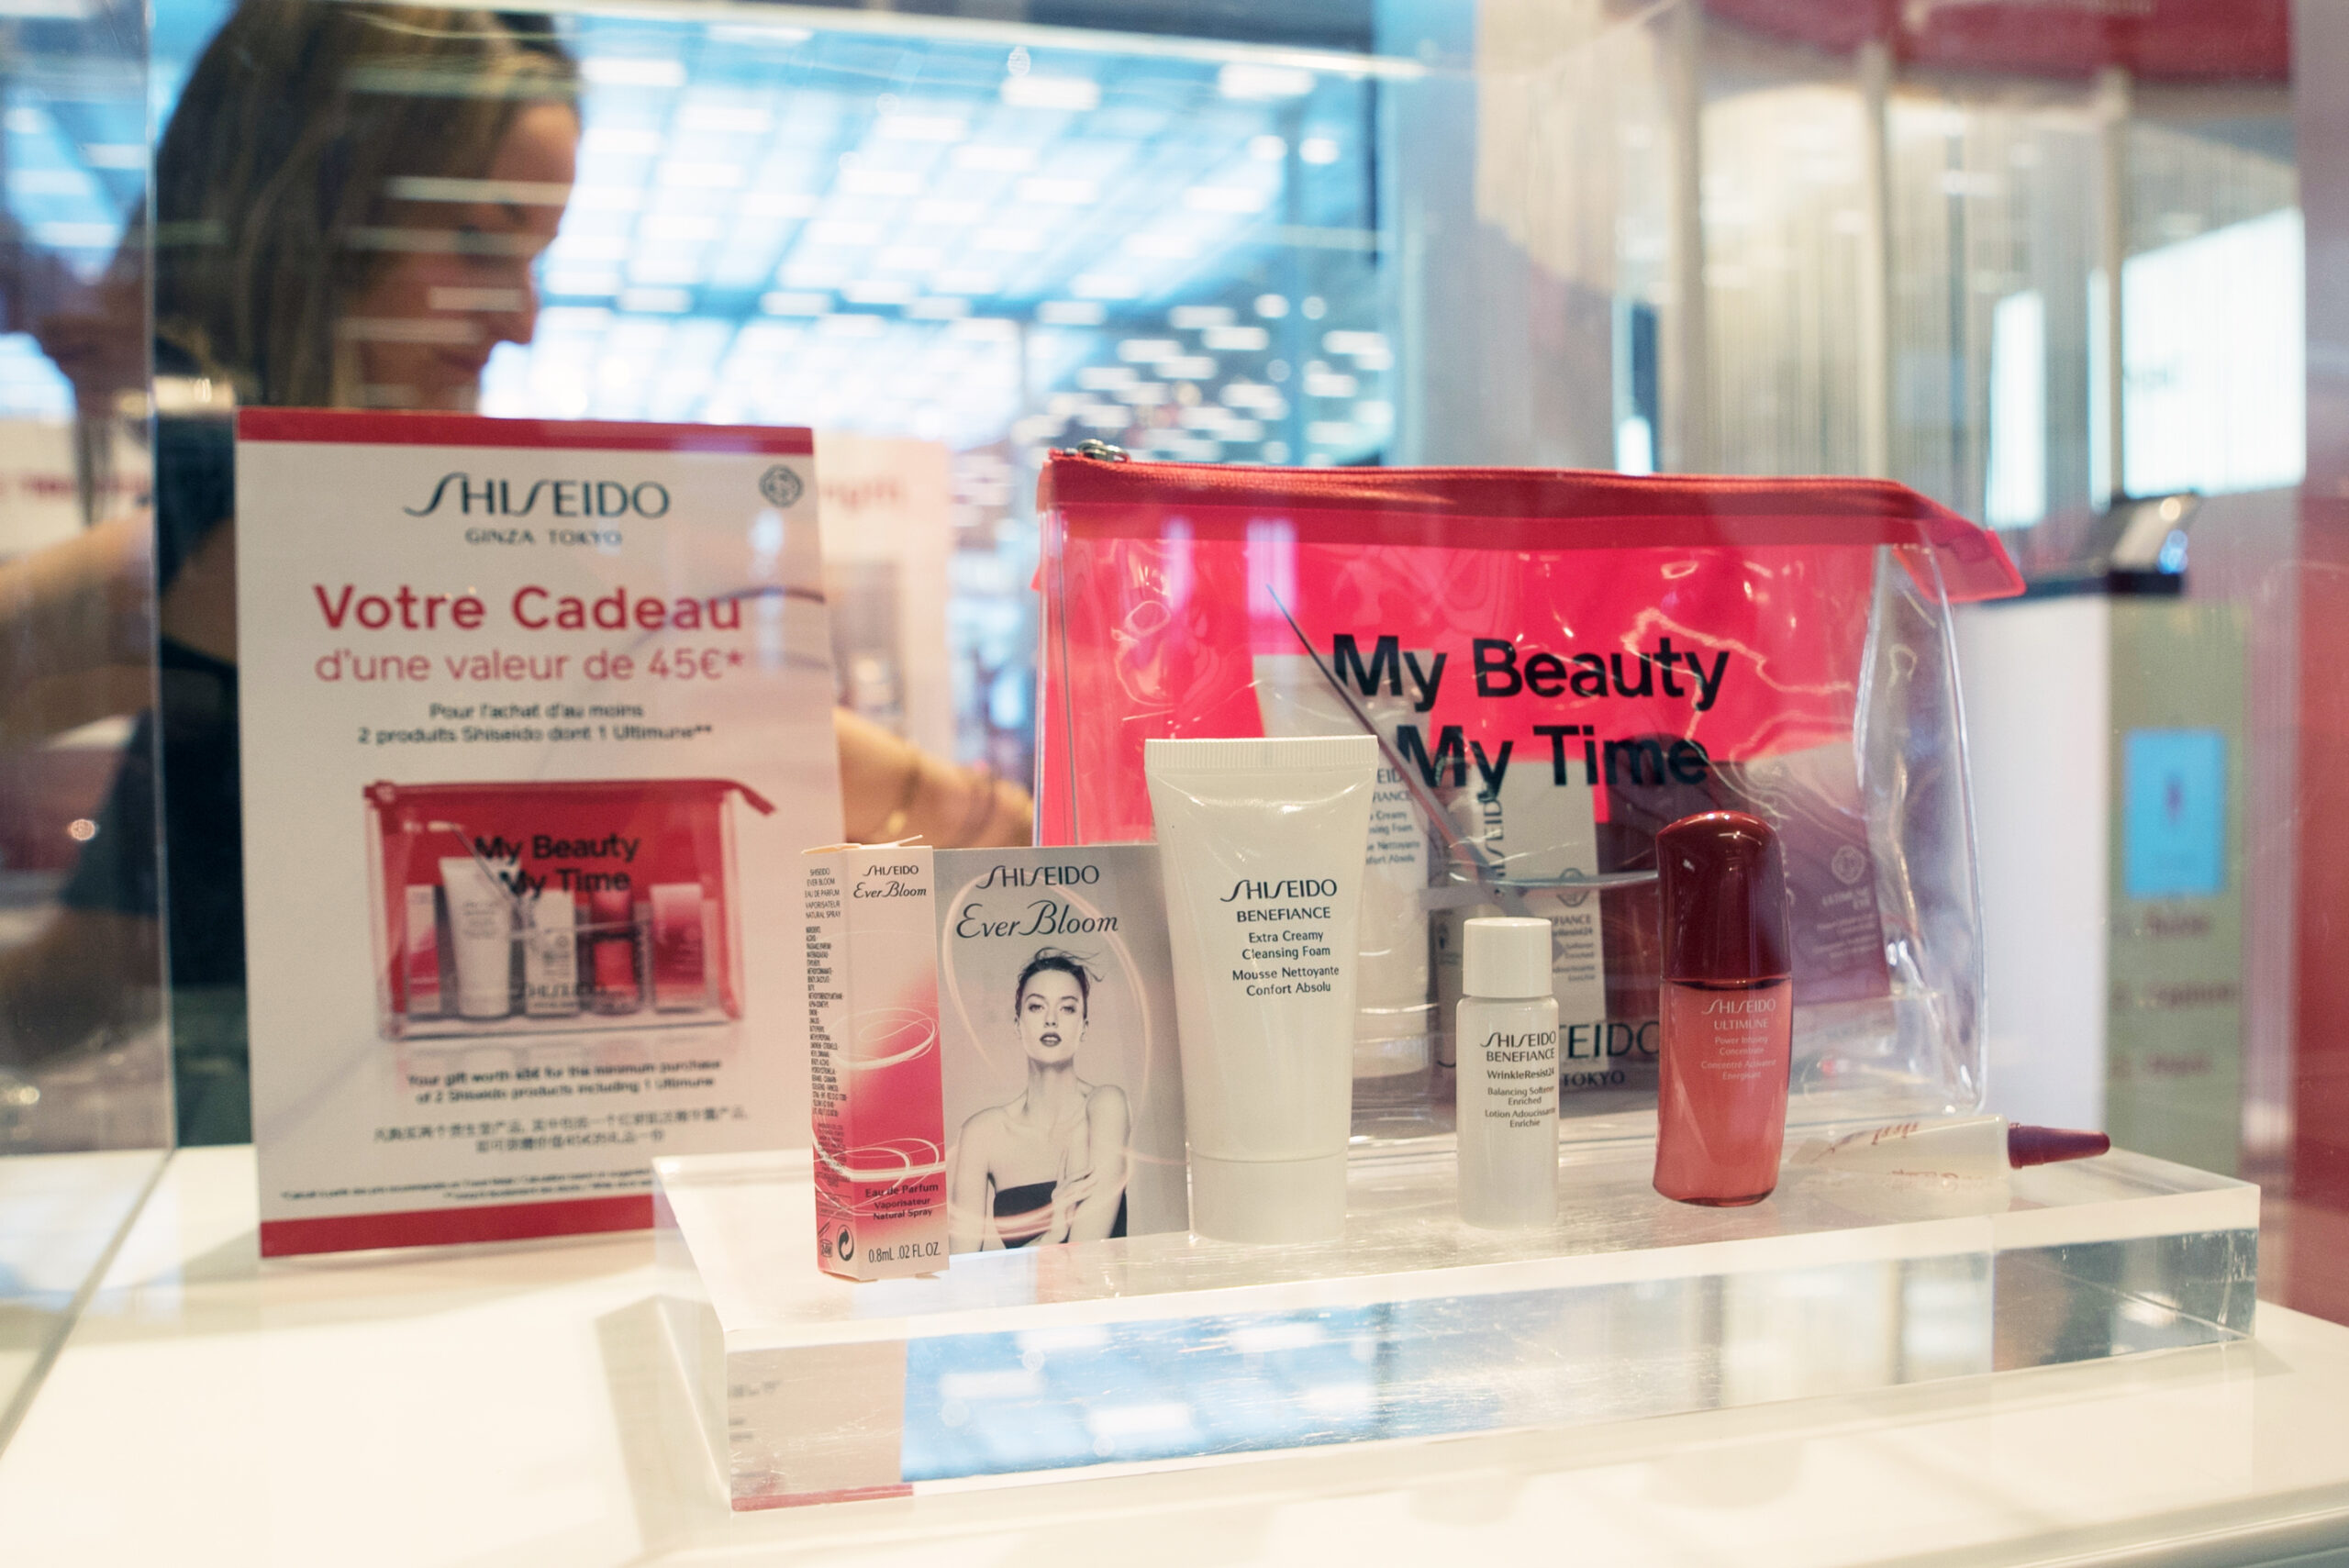 Consumers who purchase a minimum of two products, including one from the Ultimune line, with receive an exclusive set of Shiseido miniatures as a gift-with-purchase